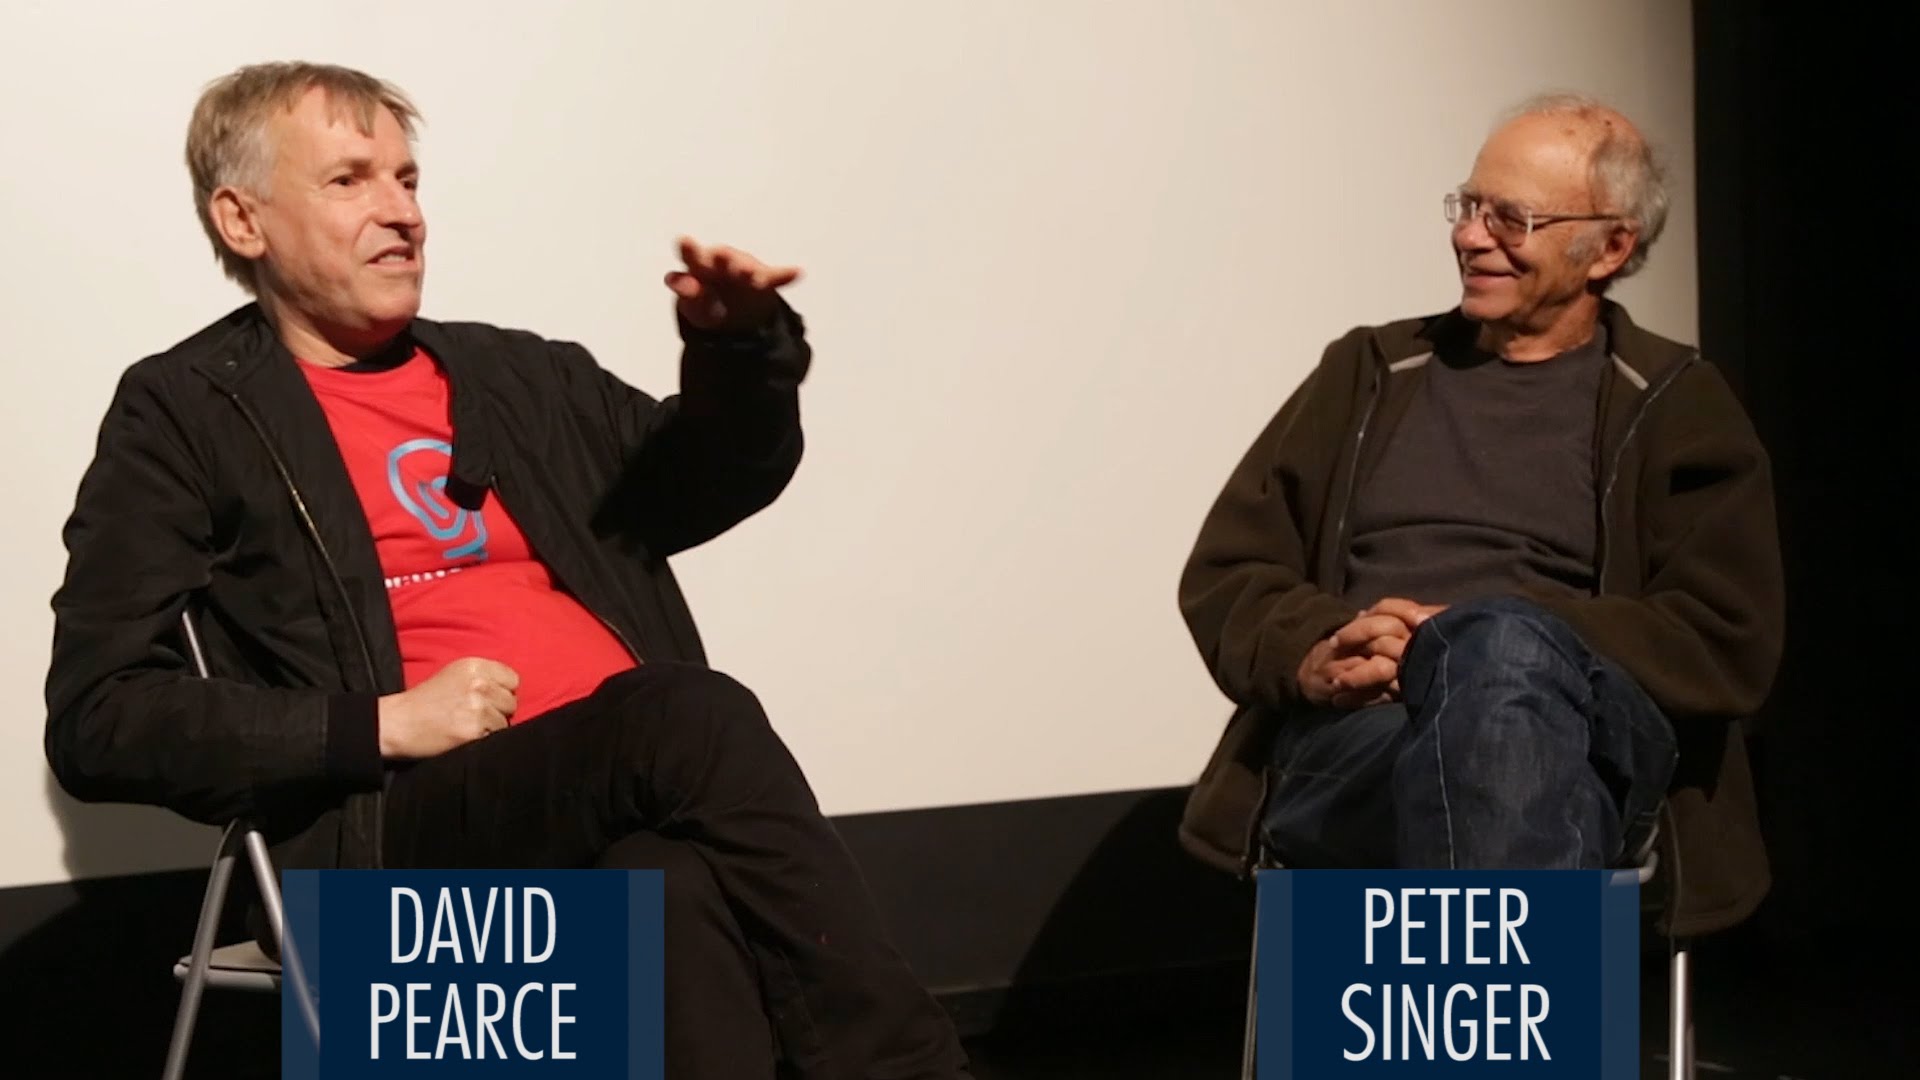 David Pearce chats with Peter Singer